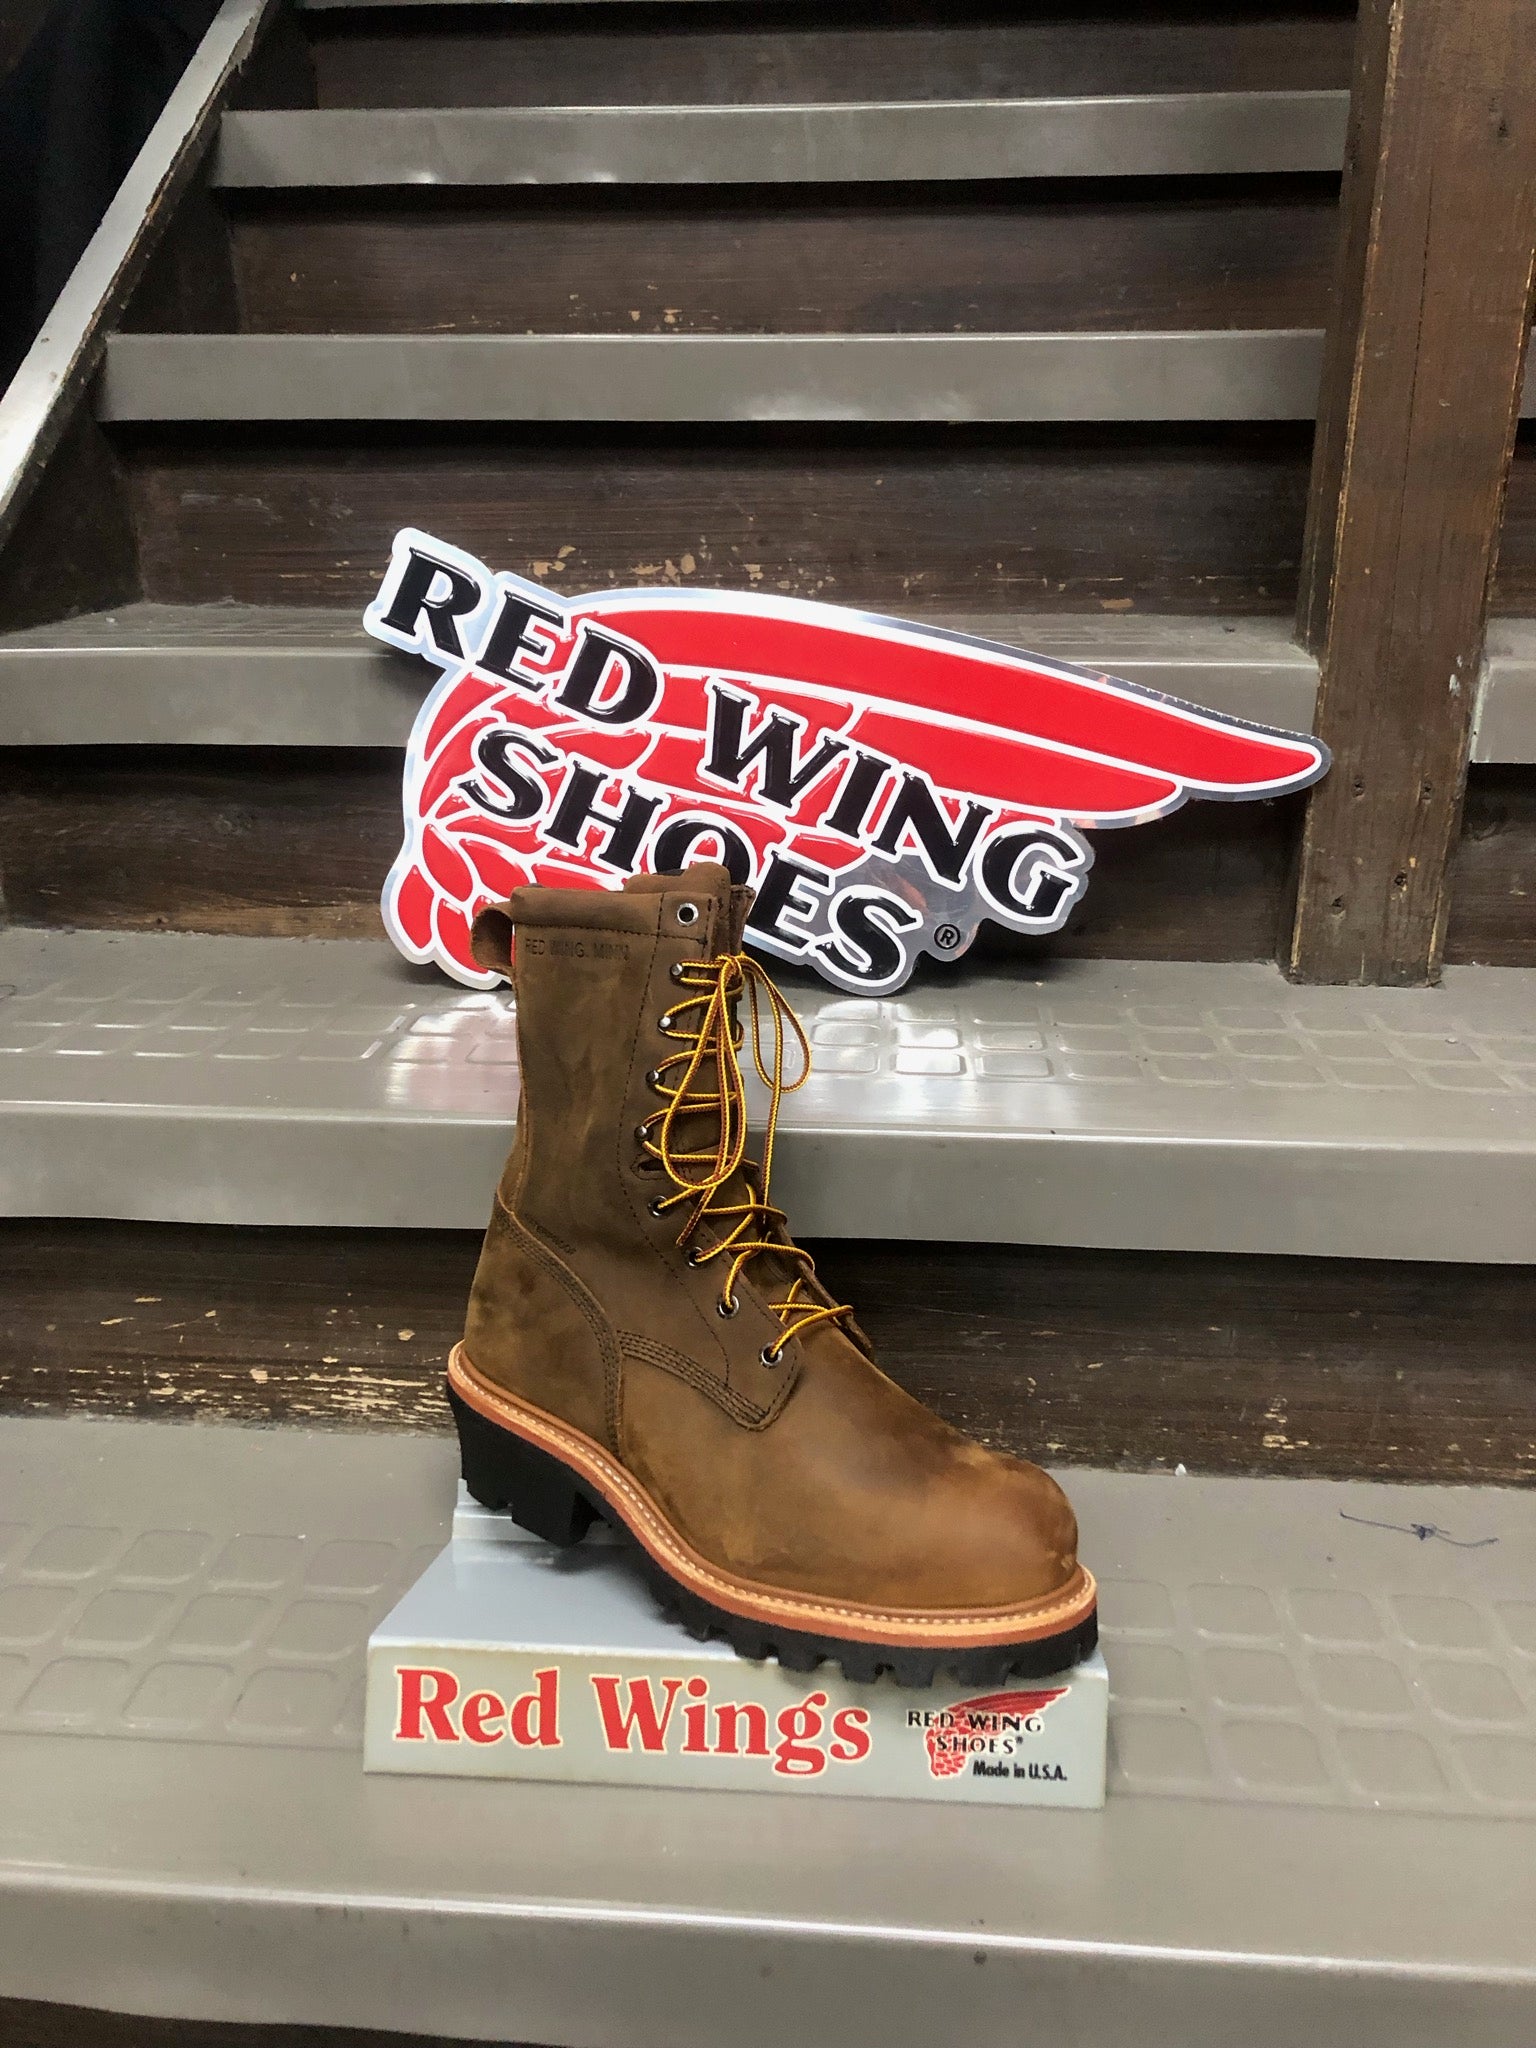 Red Wing Boots - Homer Men and Boys Store